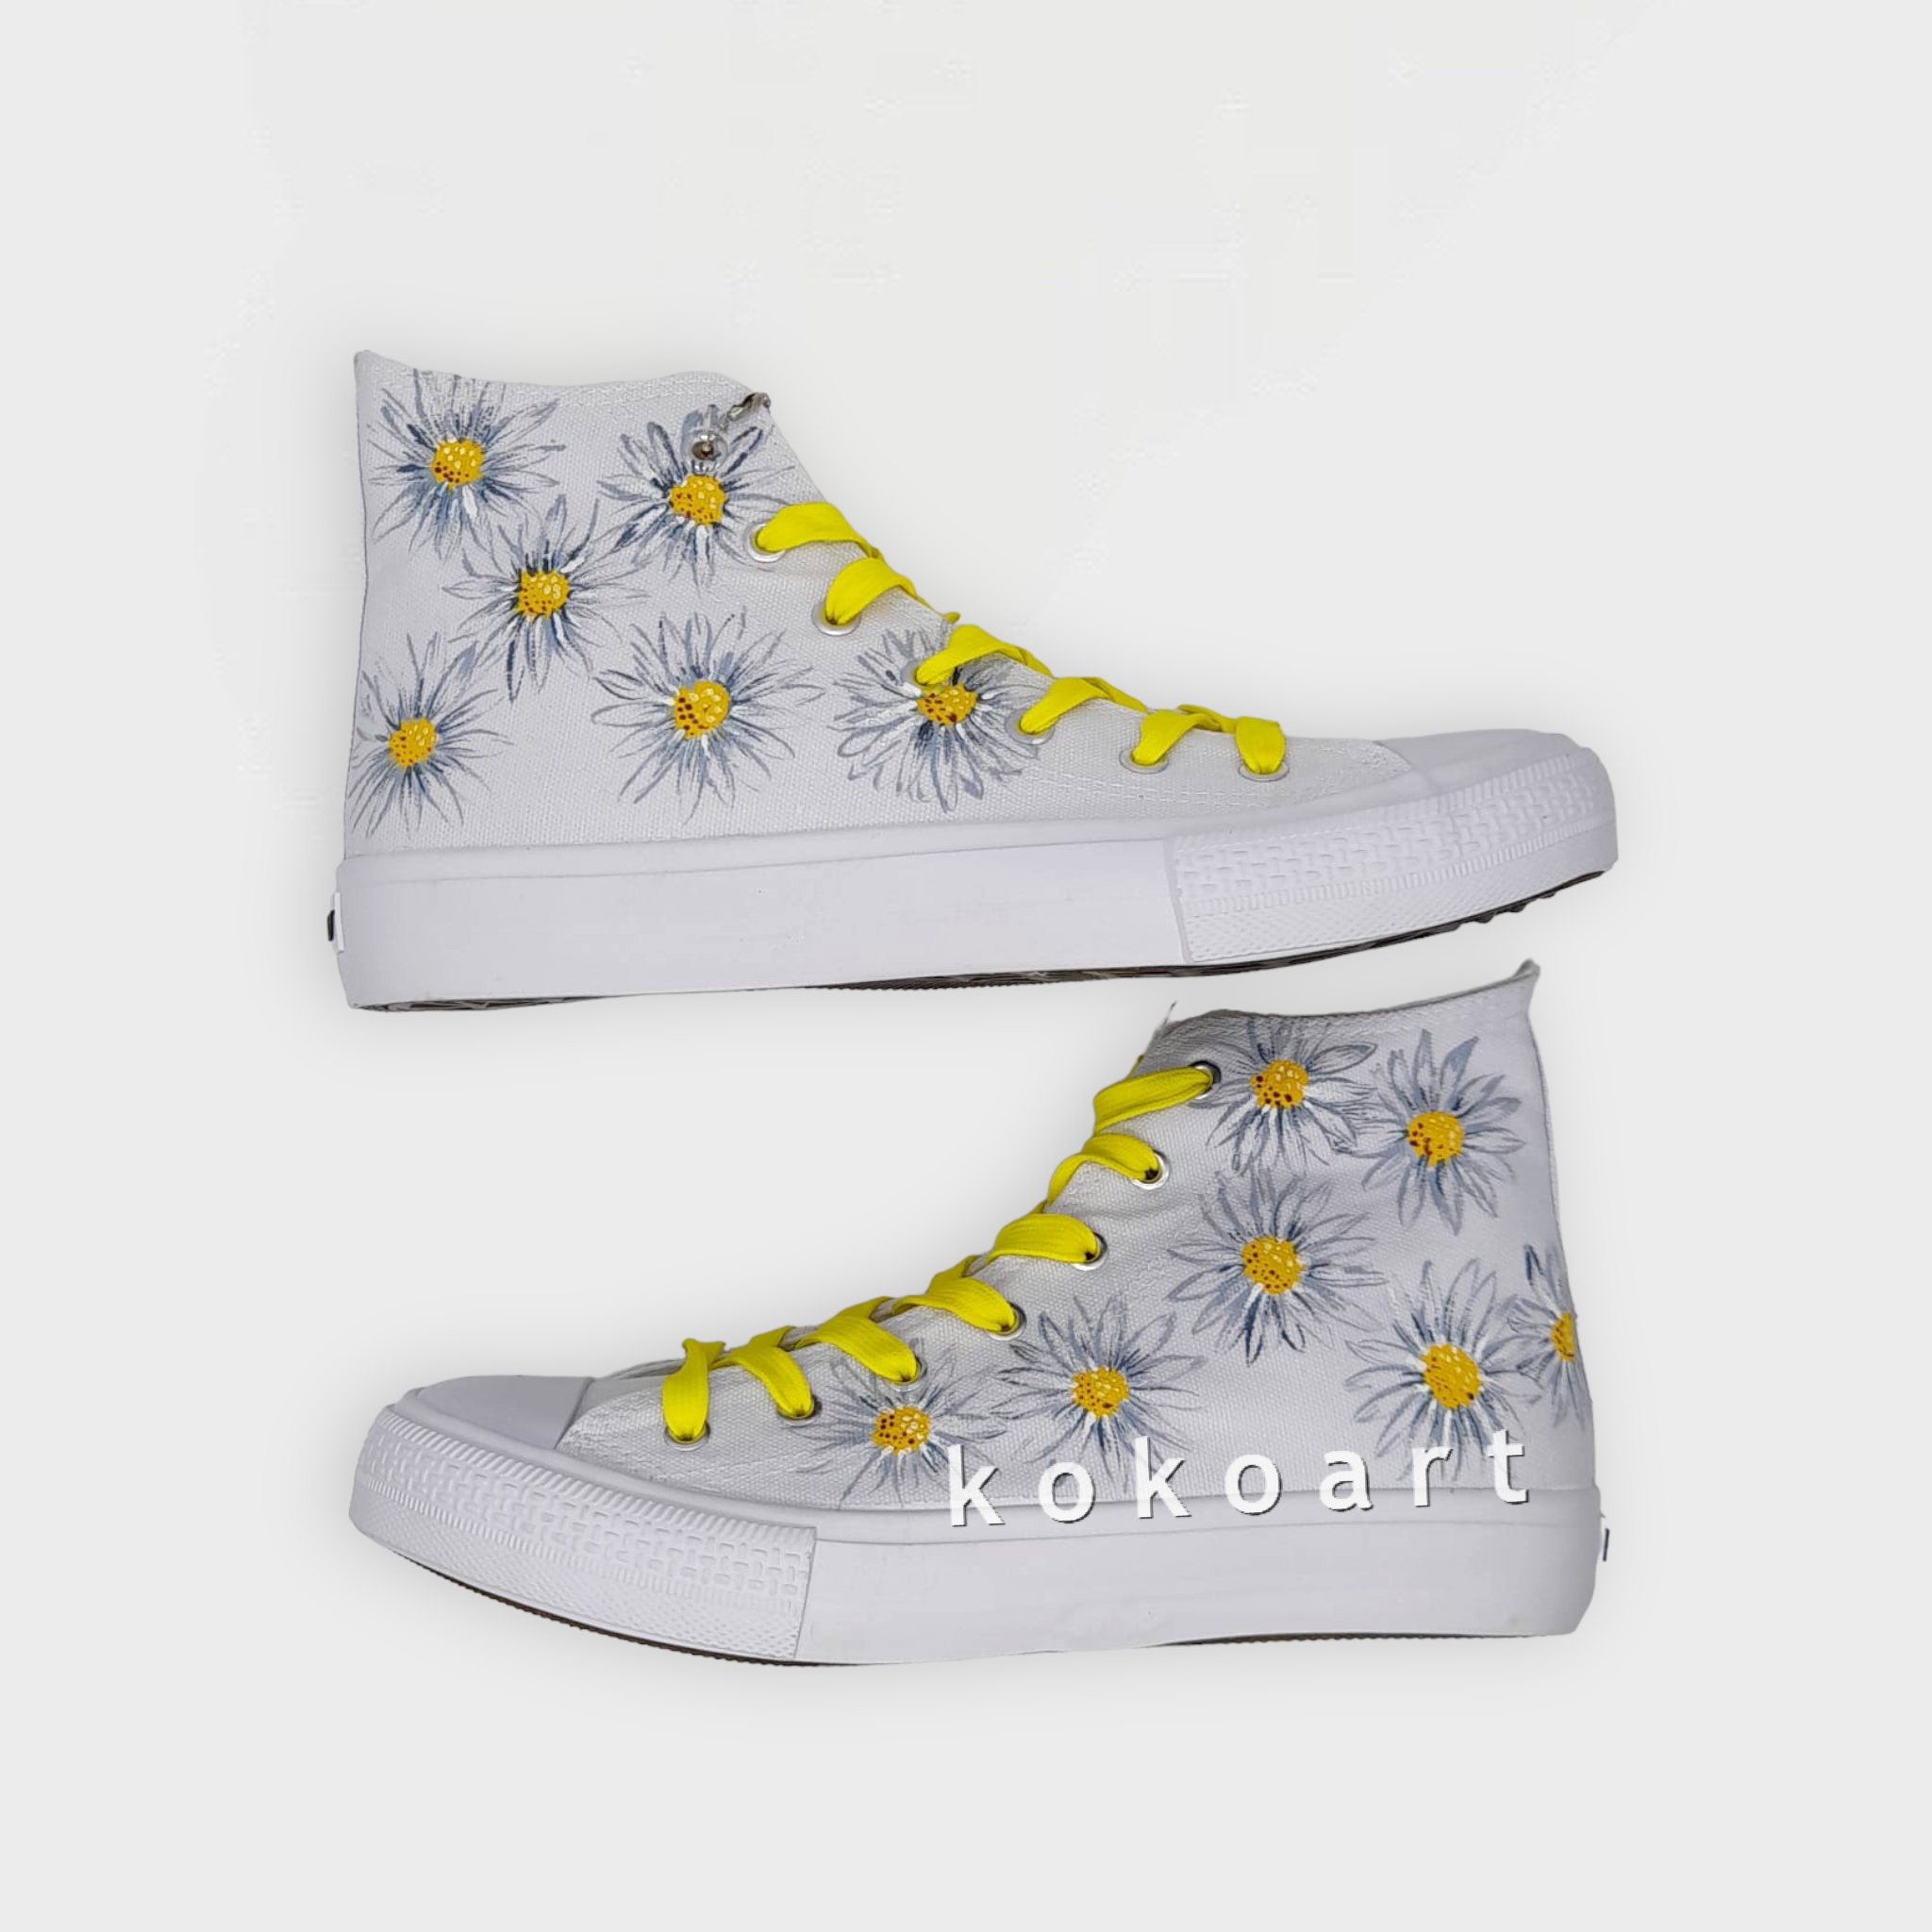 Sunflowers - Adults - Shoes